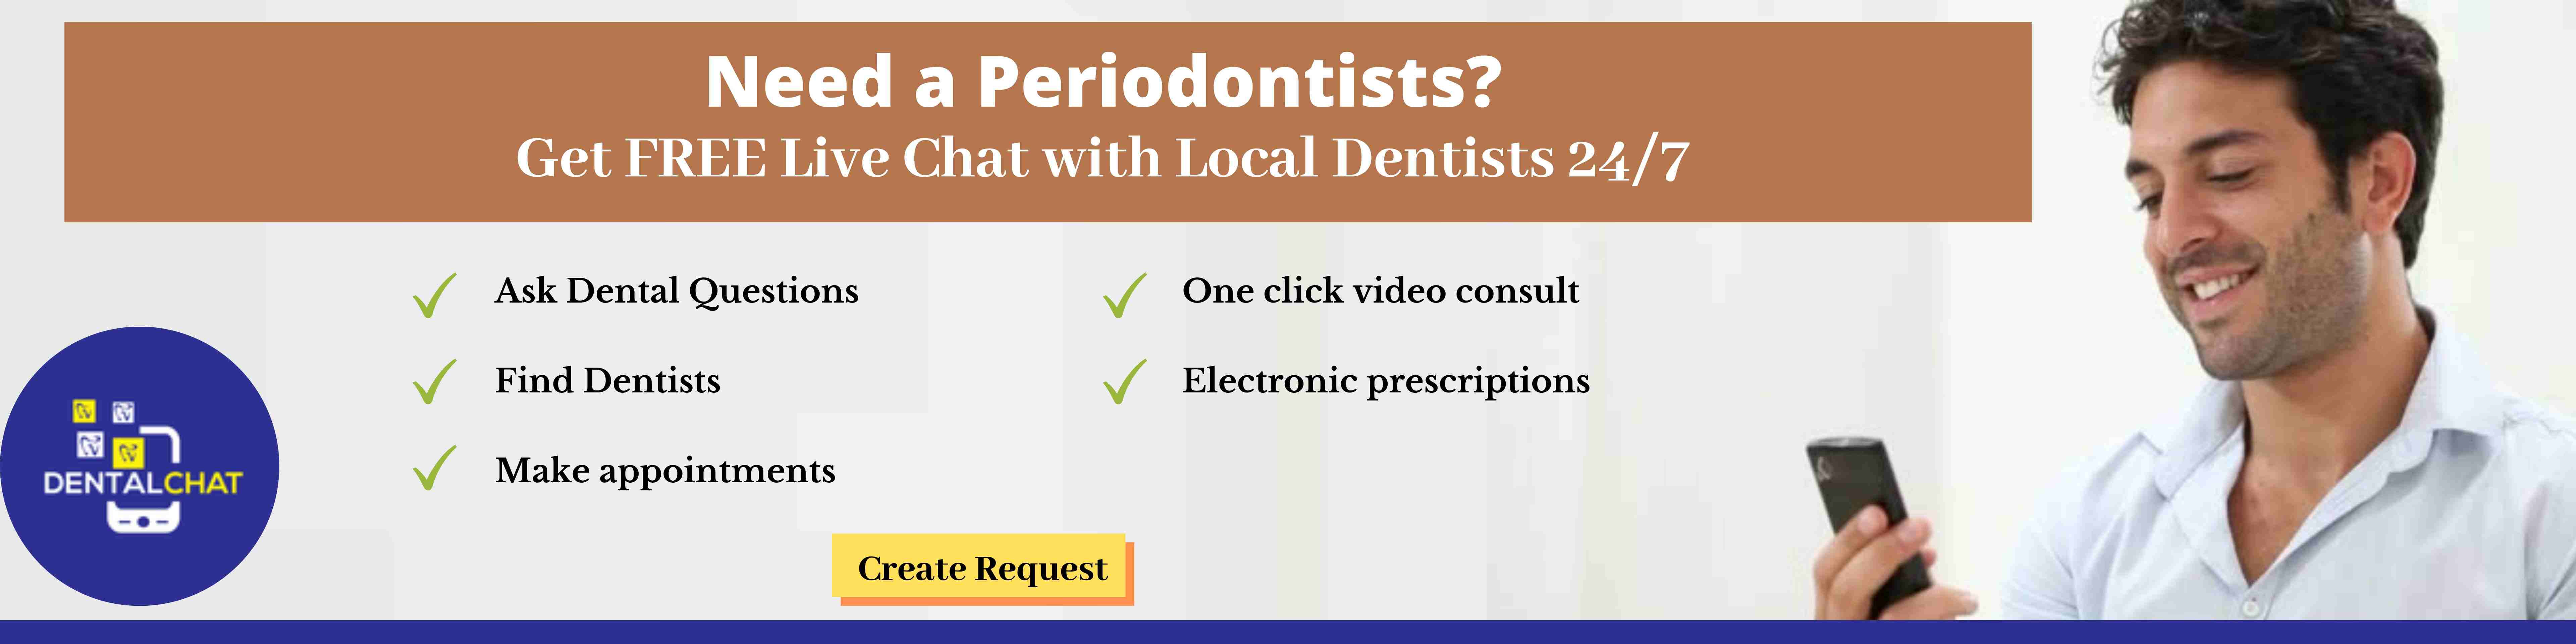 Online Periodontics Discussion, Local Periodontist Chat, Local Periodontists Blog